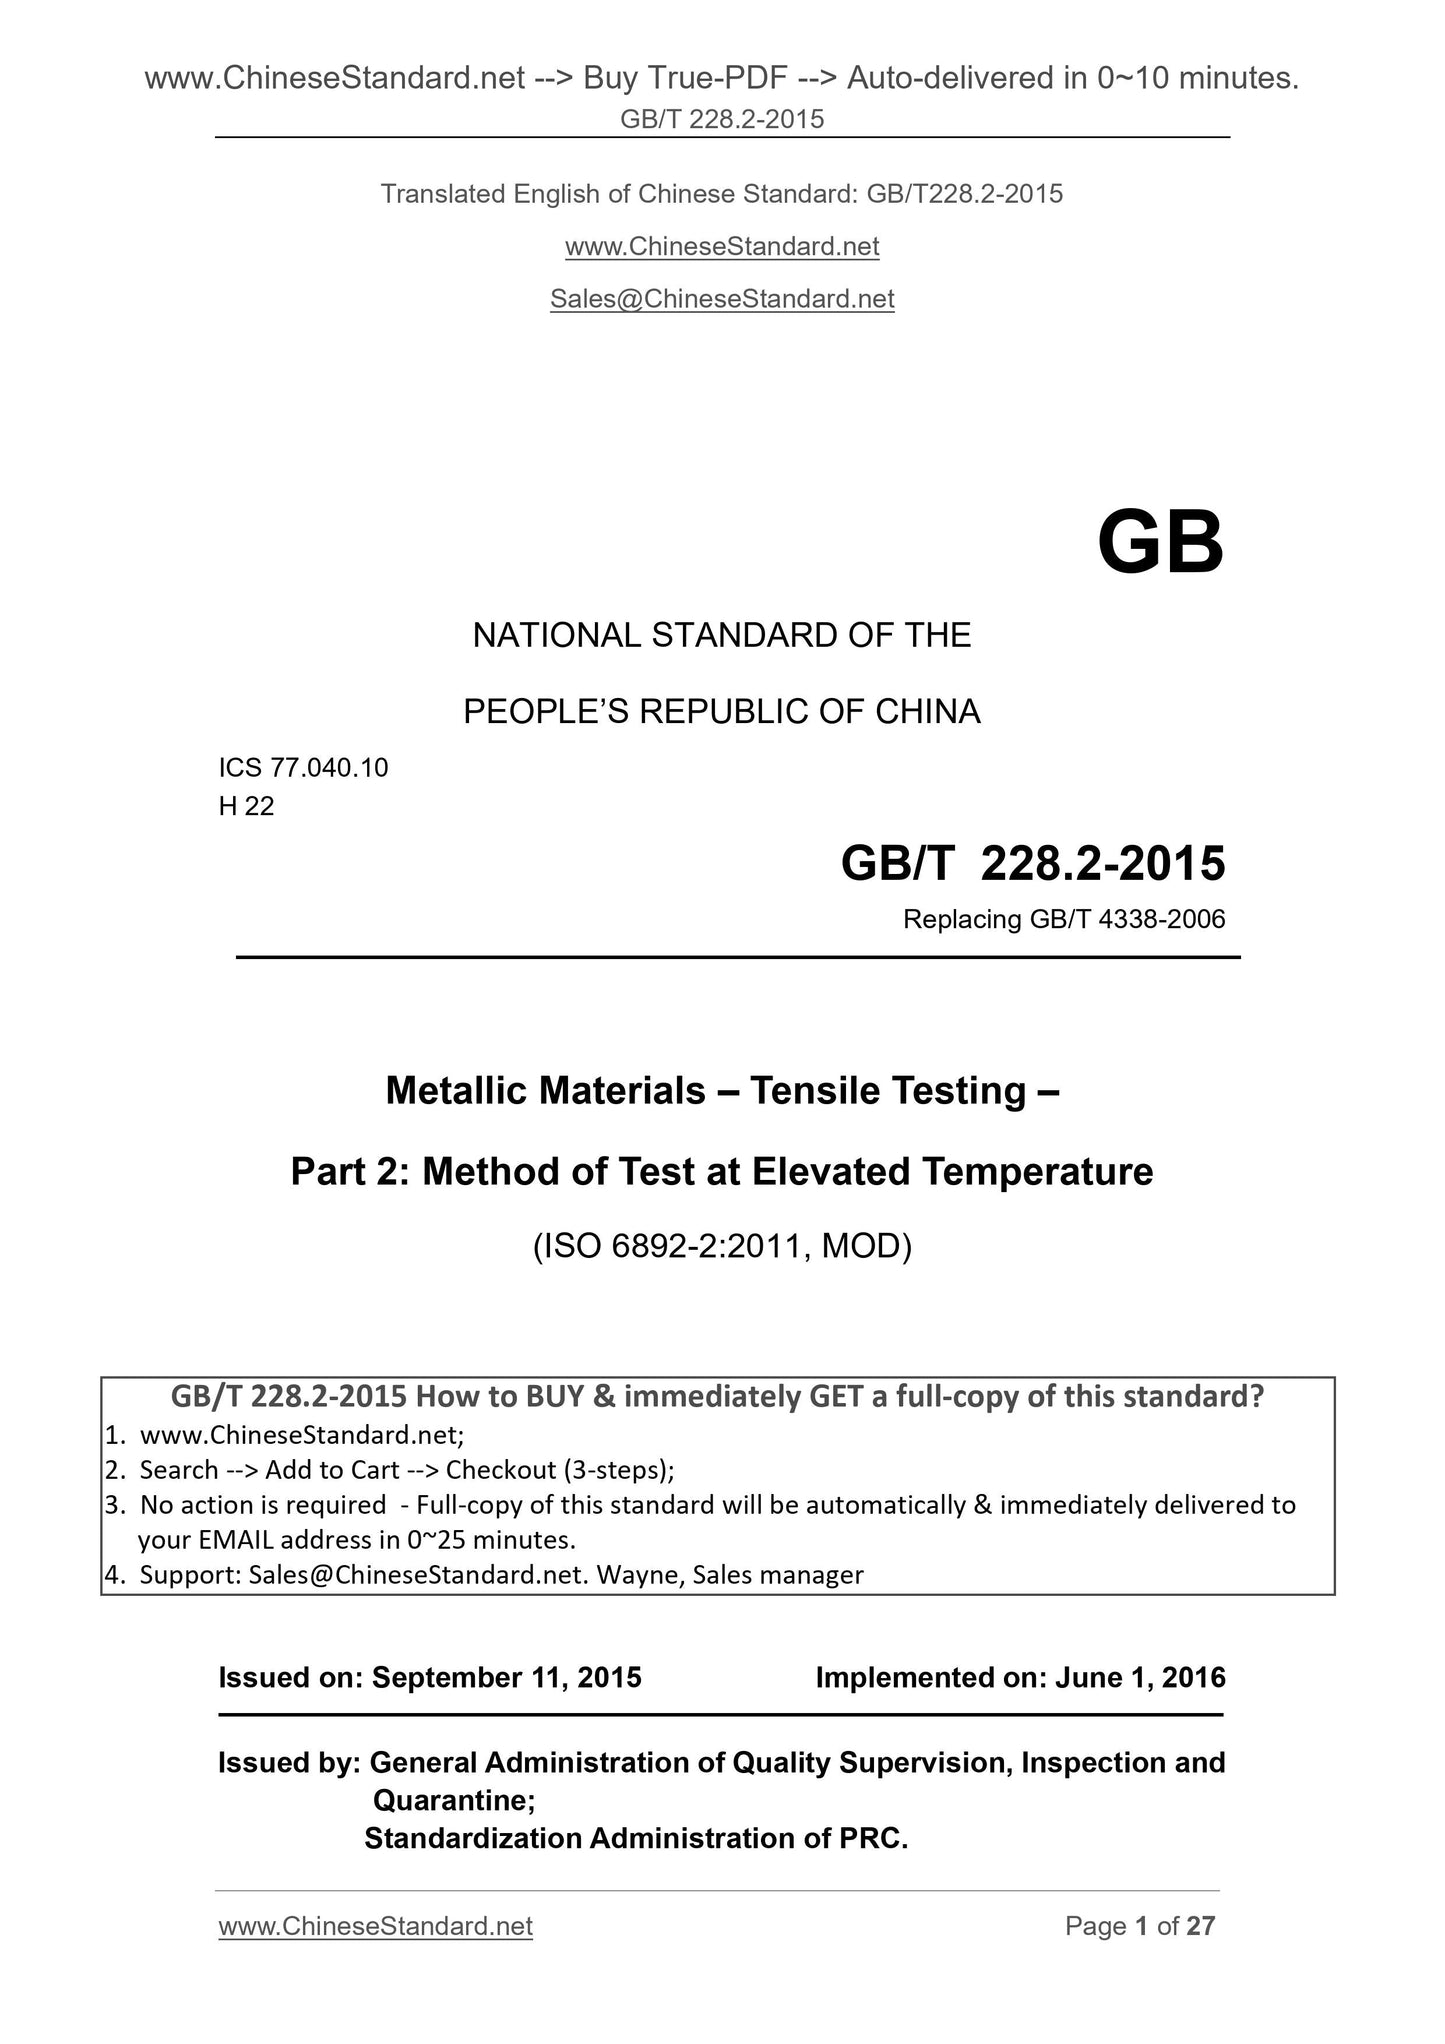 GB/T 228.2-2015 Page 1